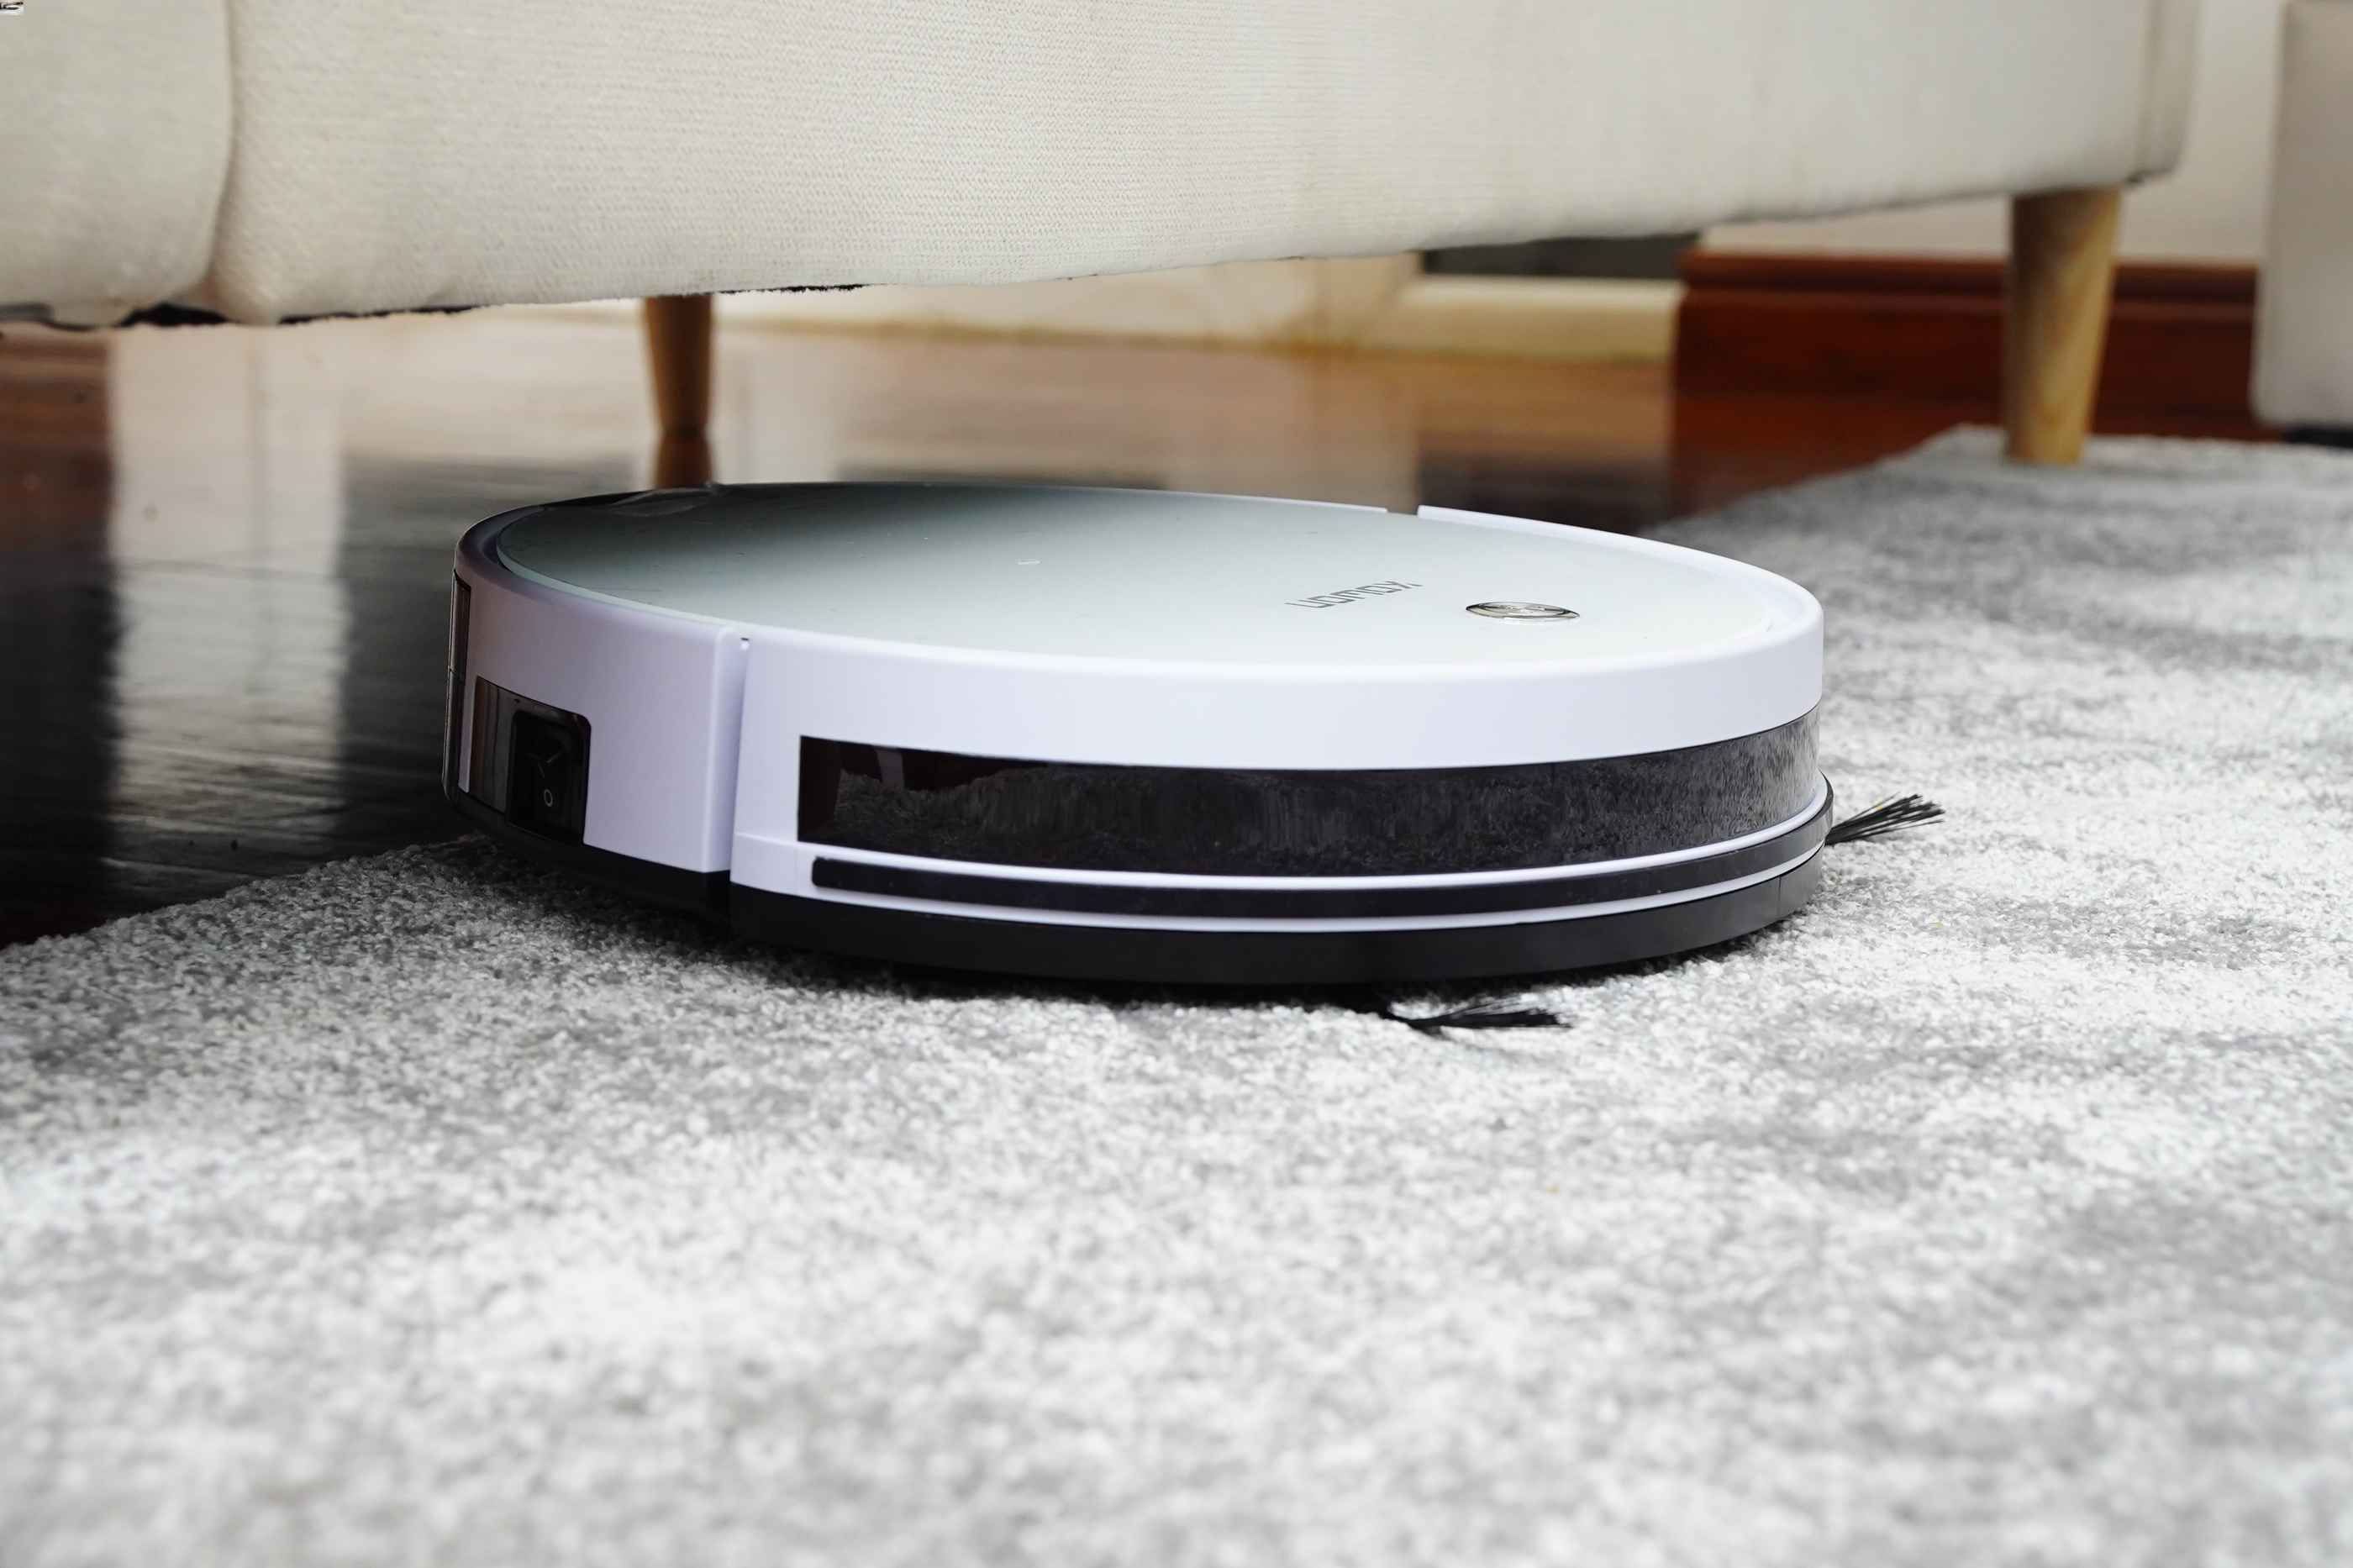 5 of the Best Robot Vacuum Cleaners for Smart Homes